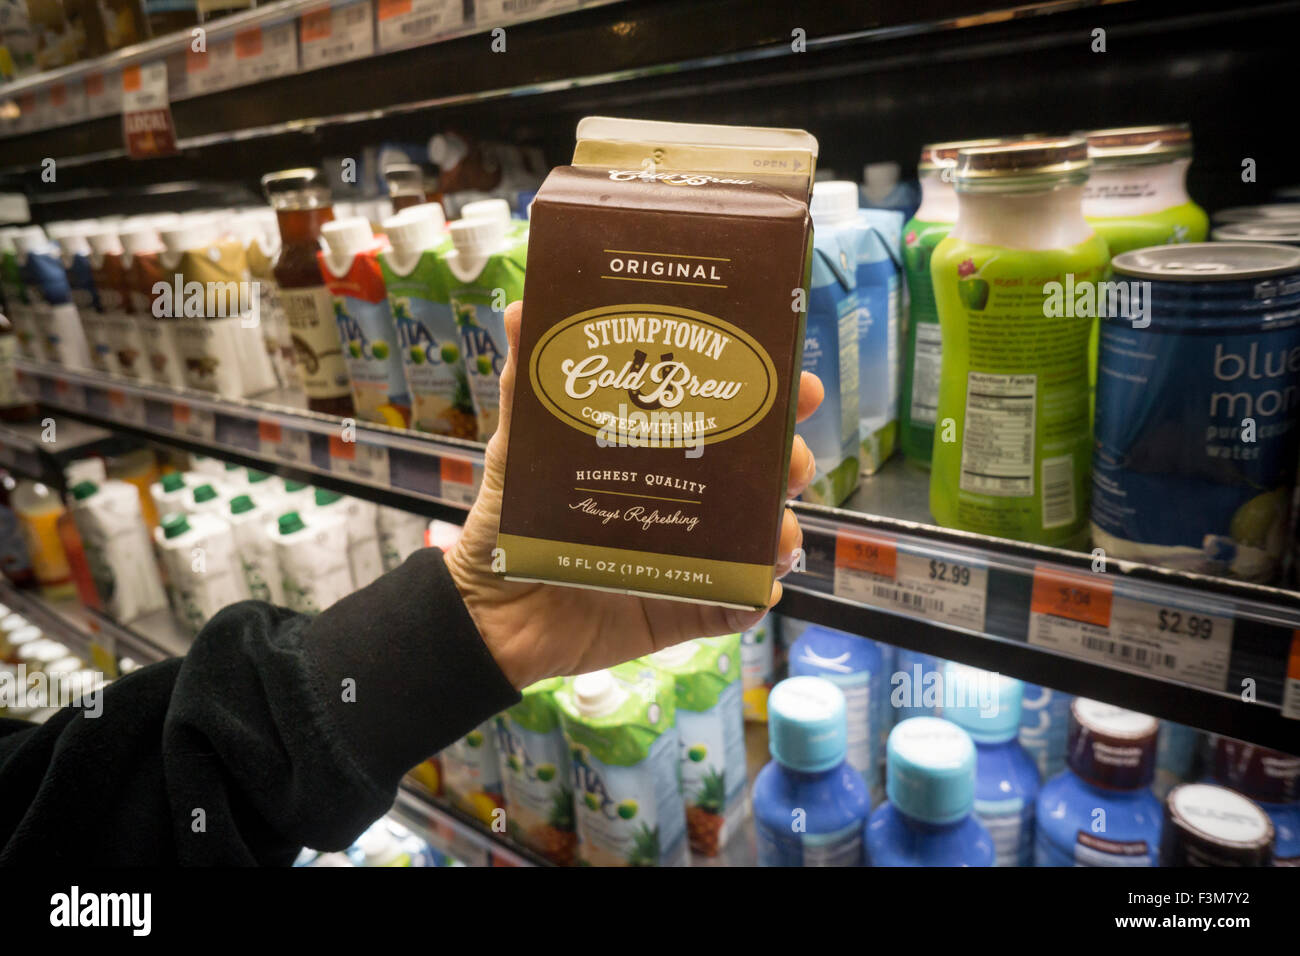 A shopper chooses a container of Stumptown Coffee Roasters' Cold Brewed Coffee in a supermarket in New York on Wednesday, October 7, 2015. Peet's Coffee & Tea has bought Stumptown Coffee Roasters for an undisclosed sum. Stumptown has a cult-like following and the two brands are expected to operate independently. (© Richard B. Levine) Stock Photo